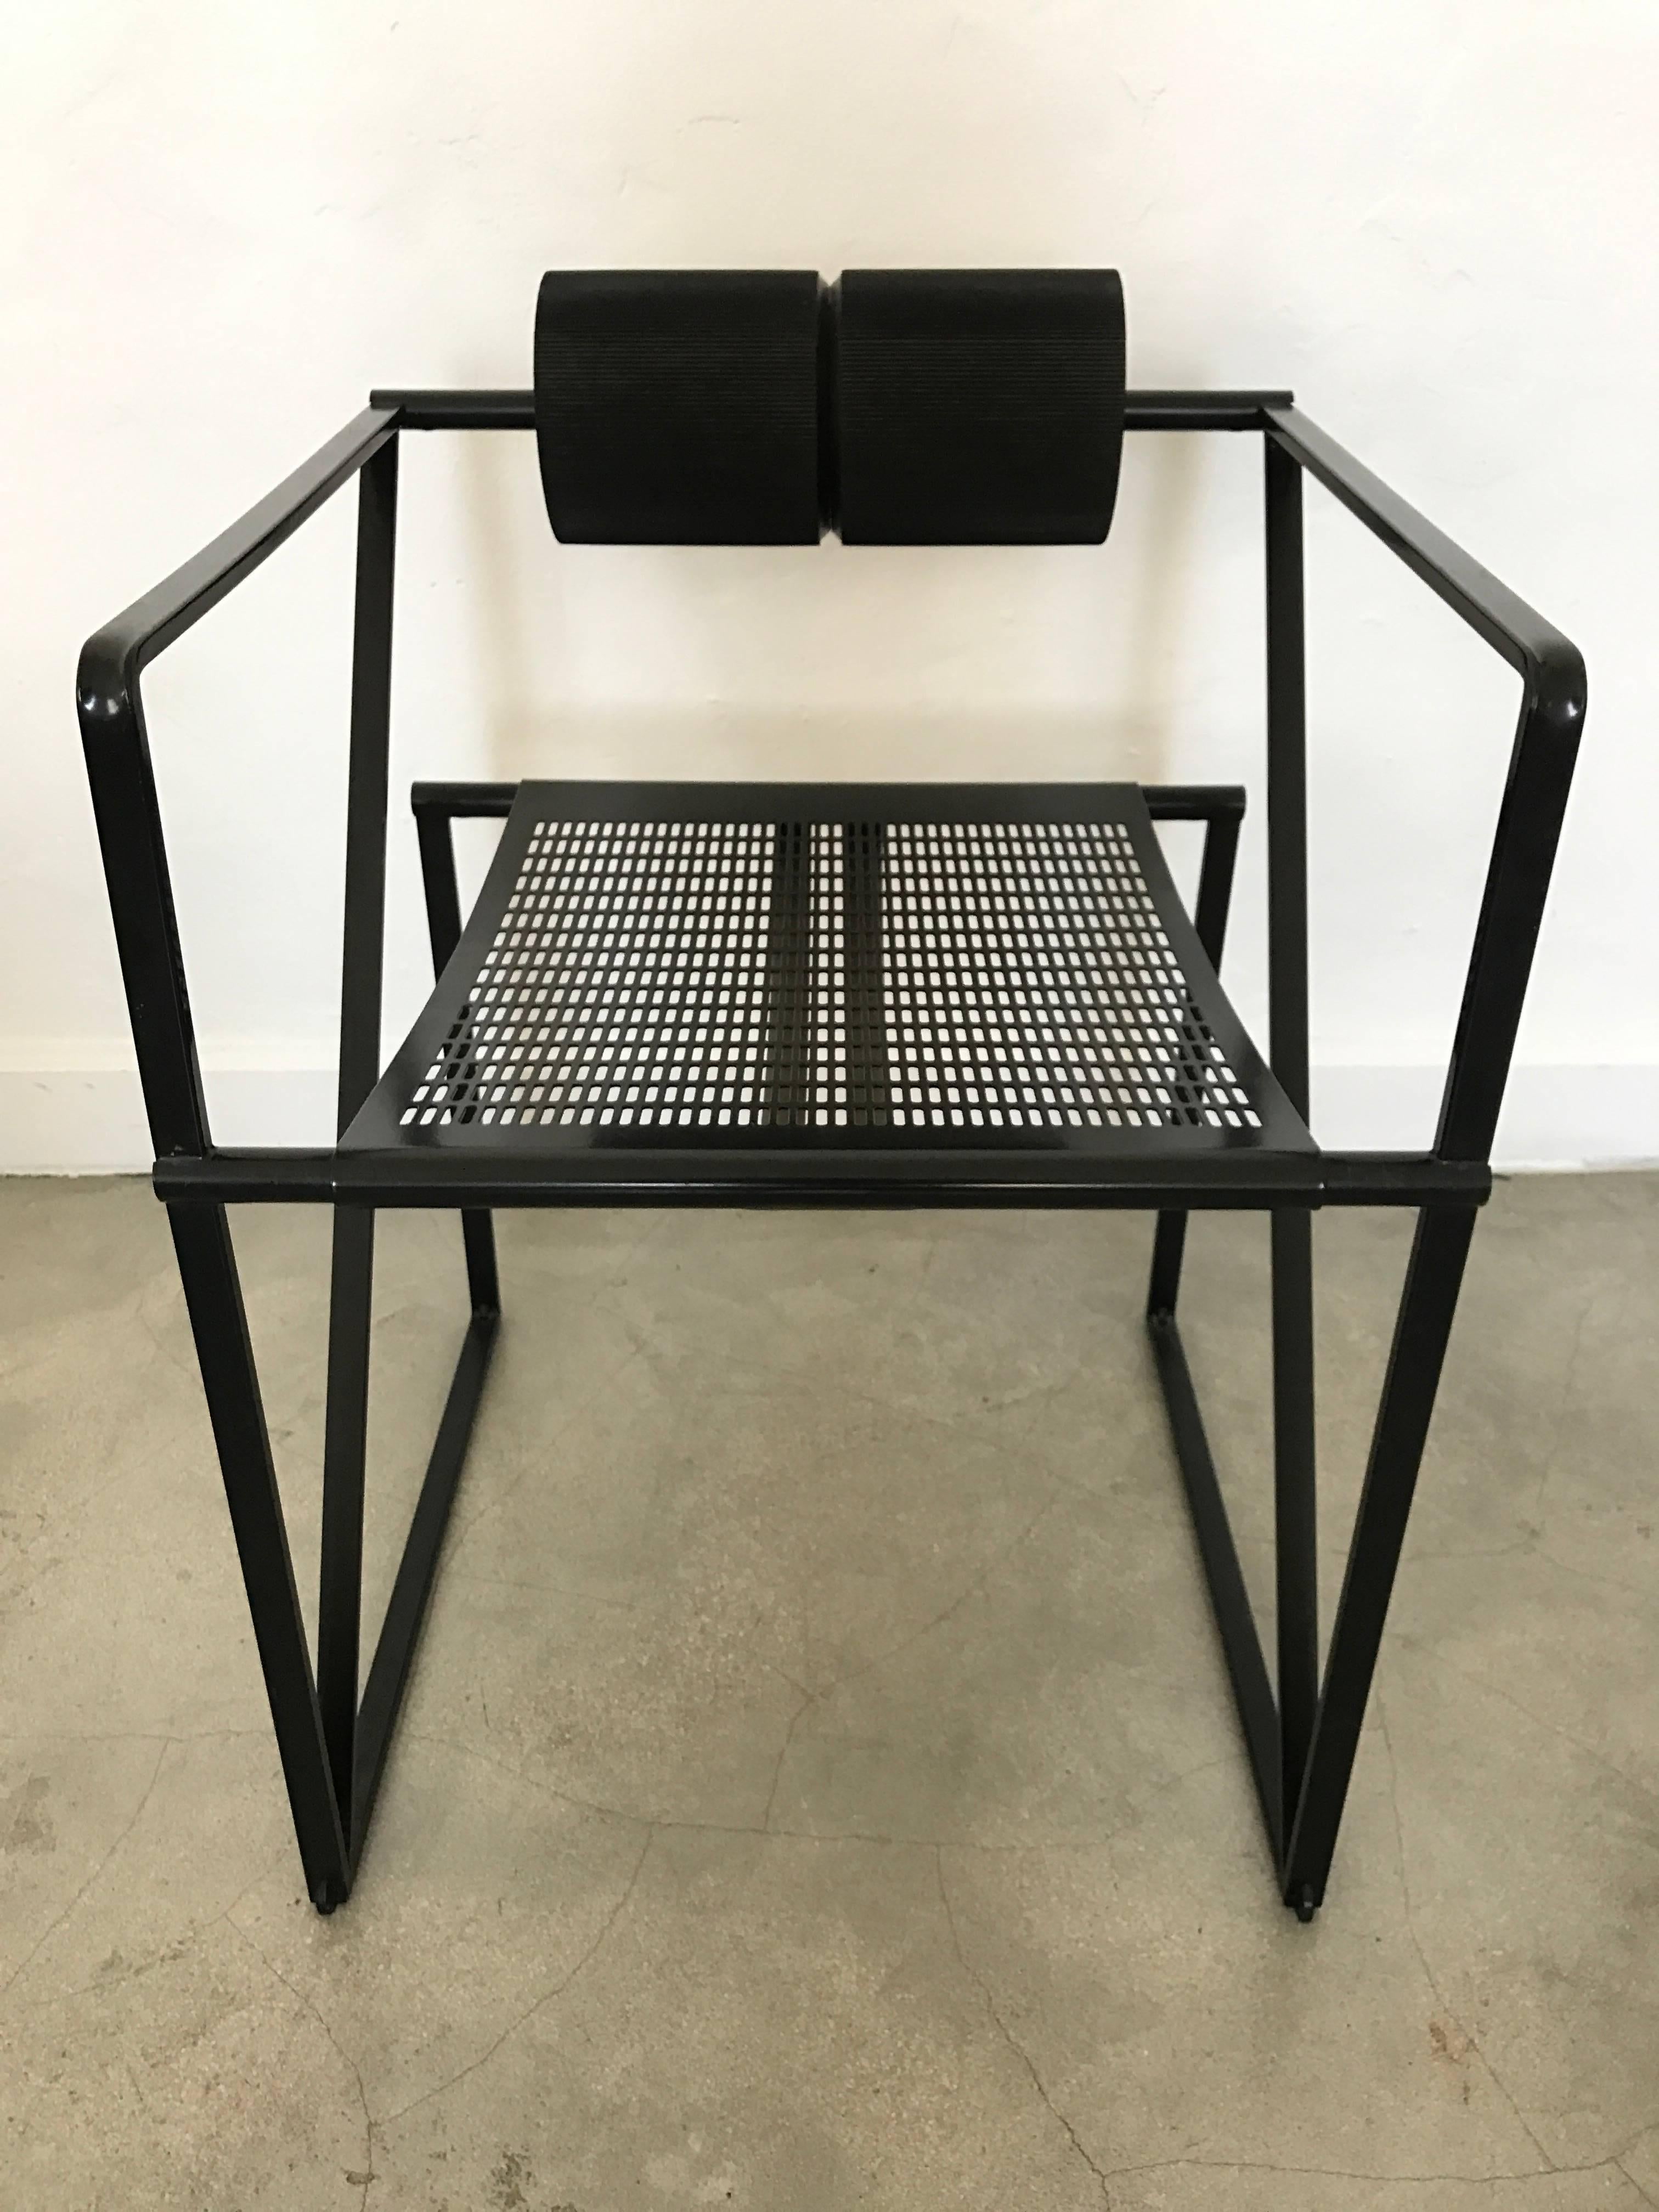 Model 602 steel frame with foam back Seconda chair by Mario Botta for Alias, Italy.